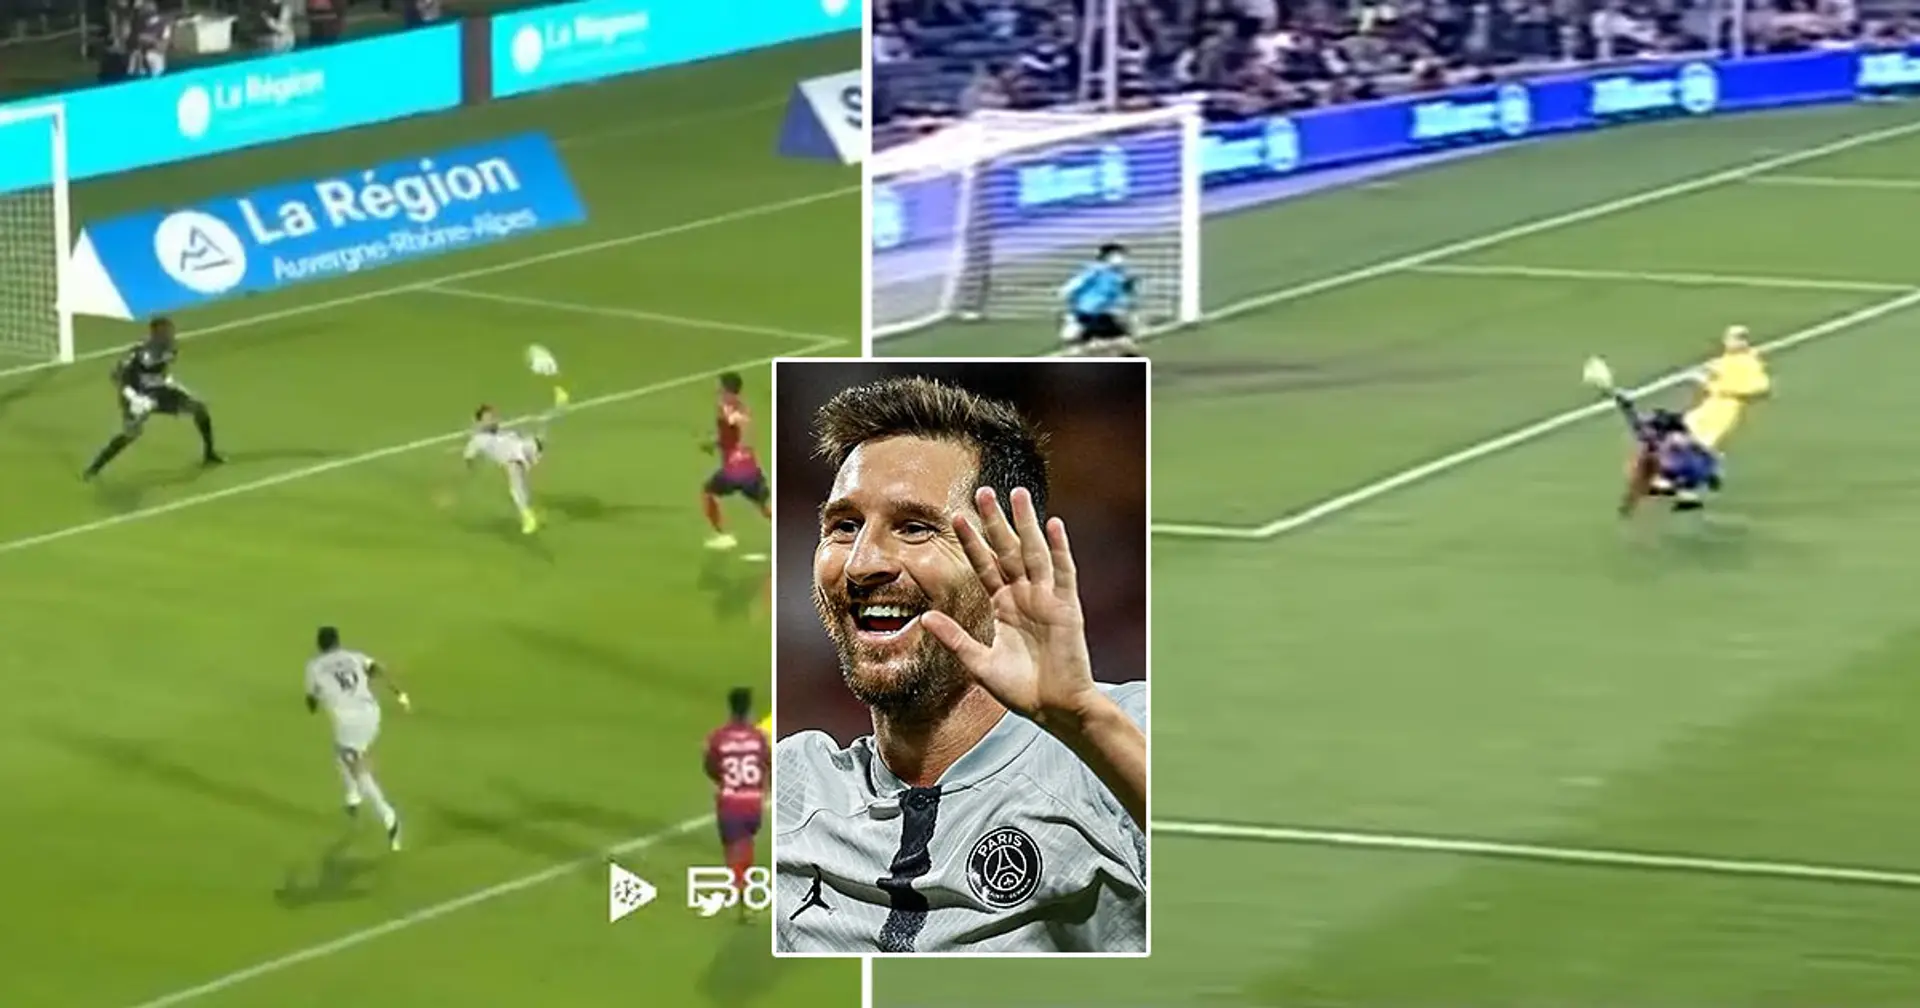 Messi scores stunning bicycle kick goal - it's first of his career